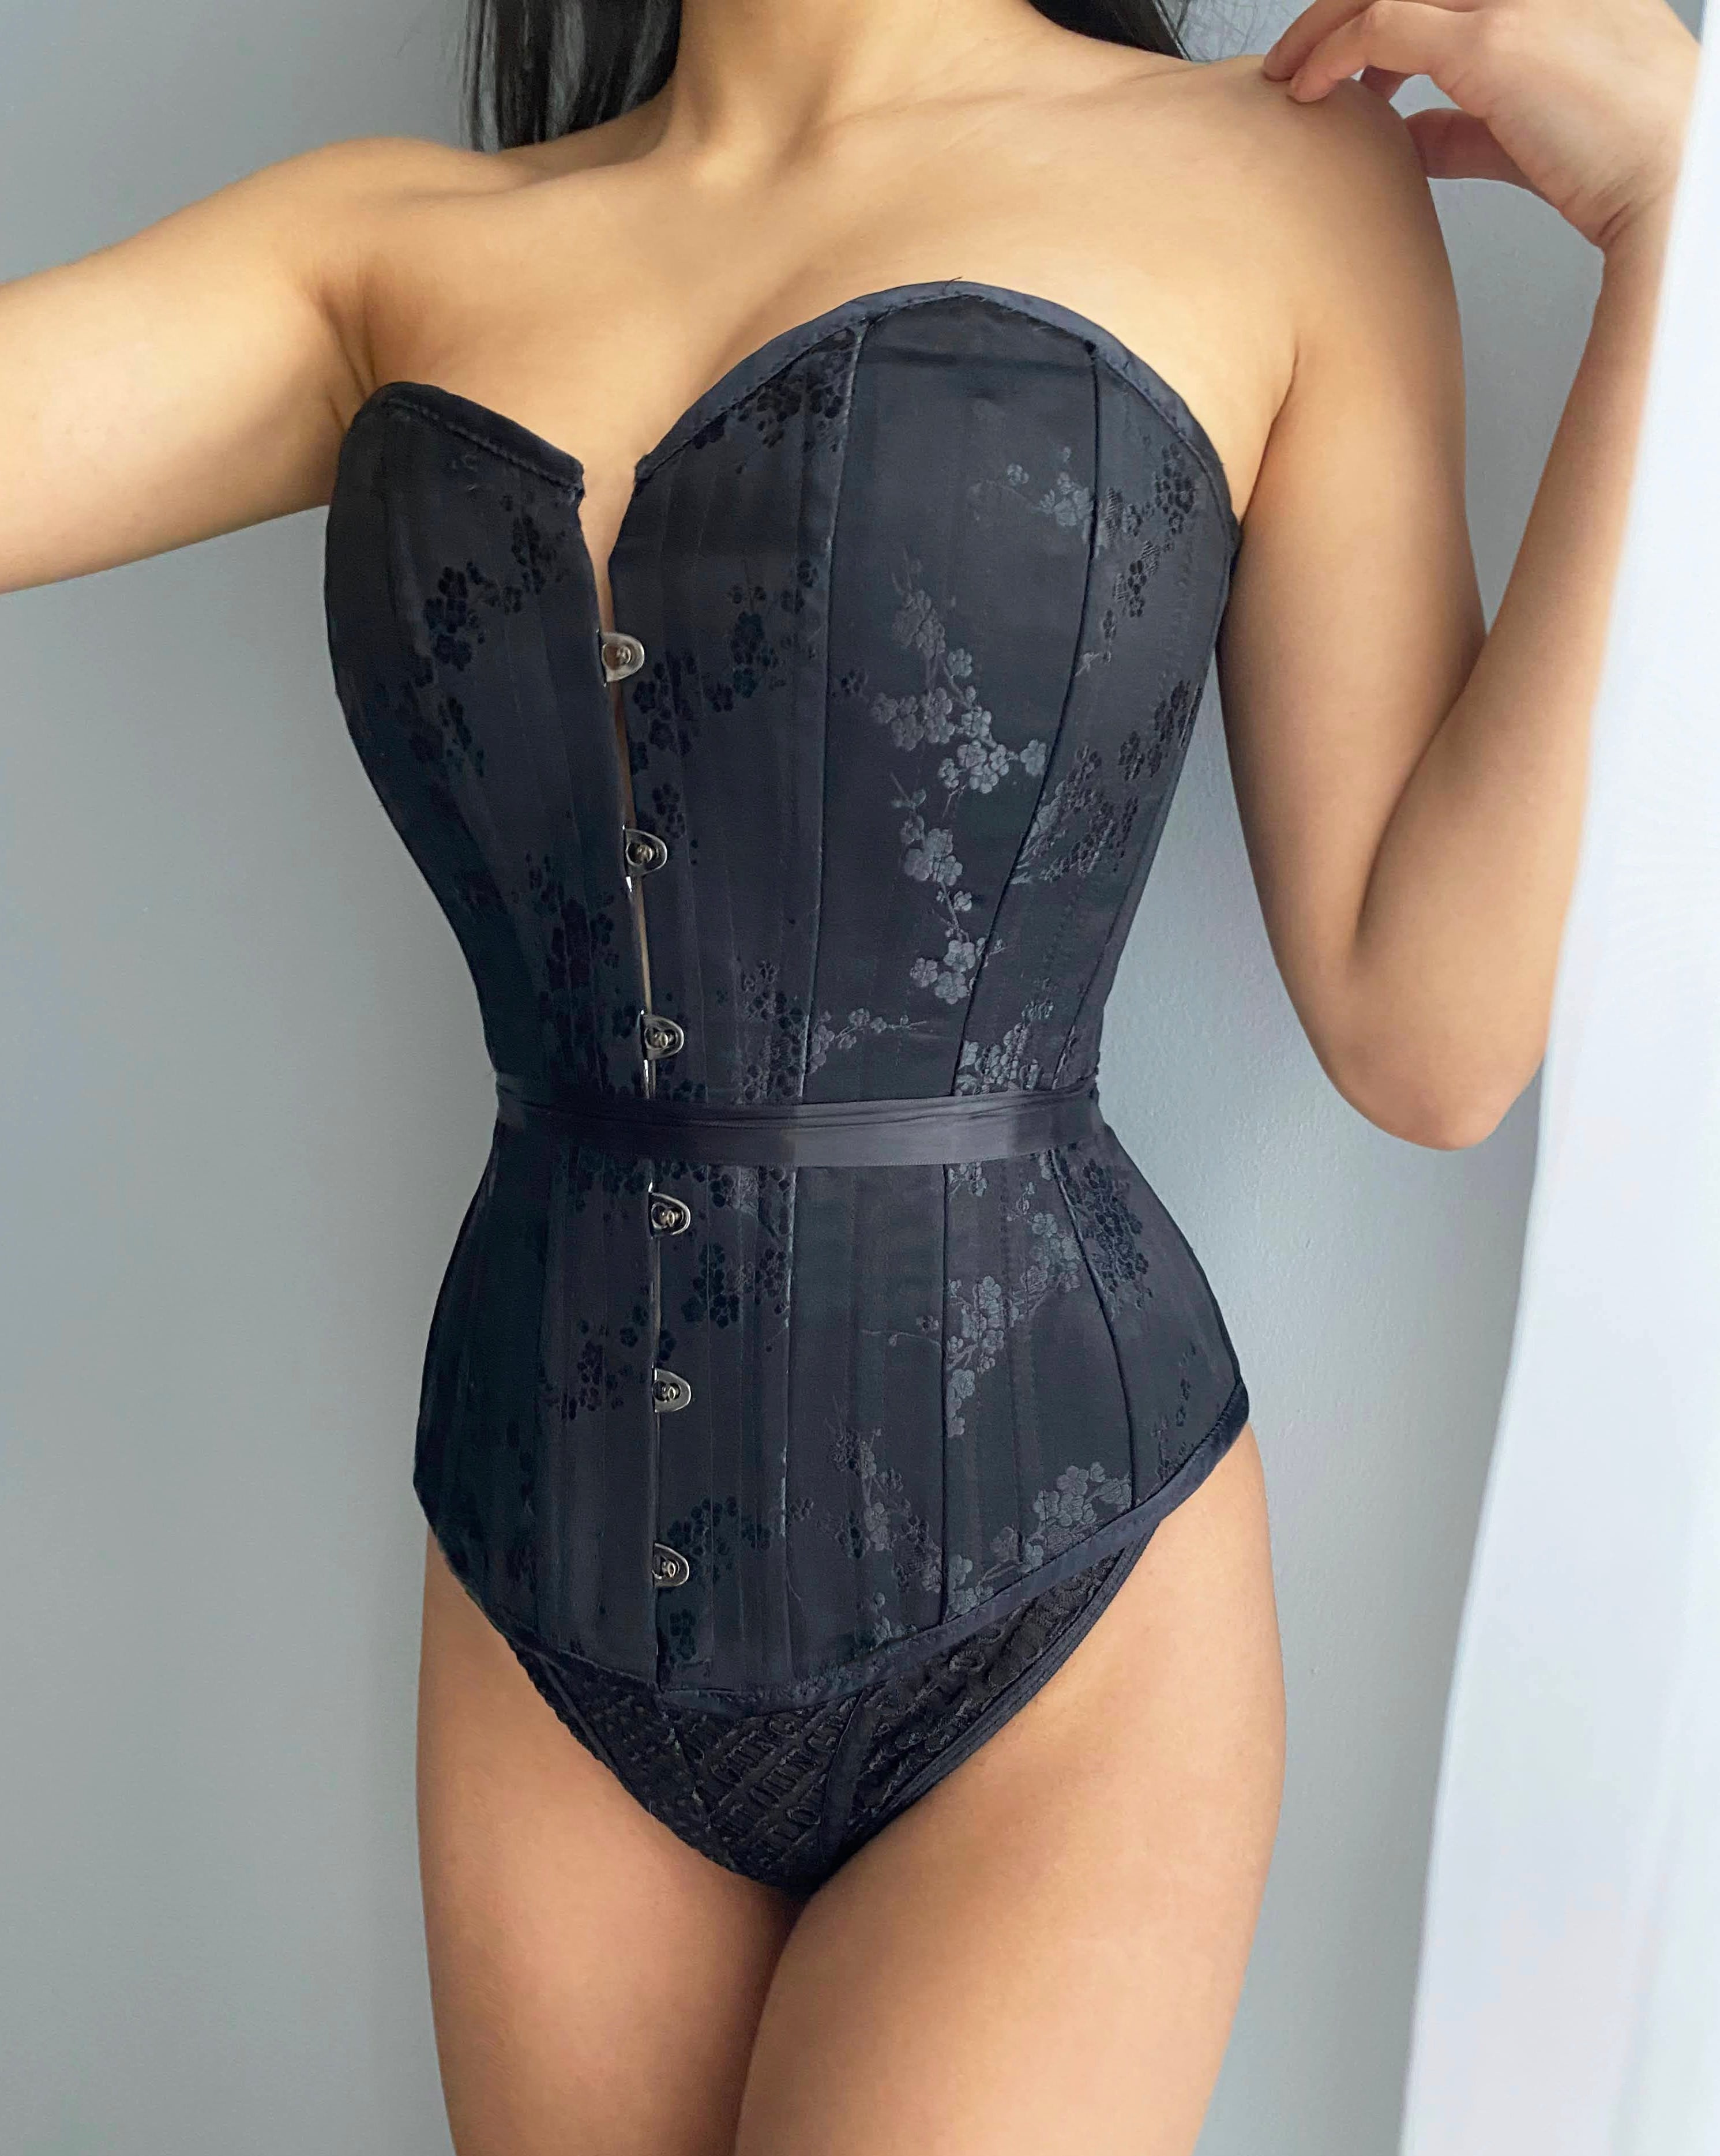 Luxury Custom Corsets. Specialty Bras by Expert Fitters & Designers